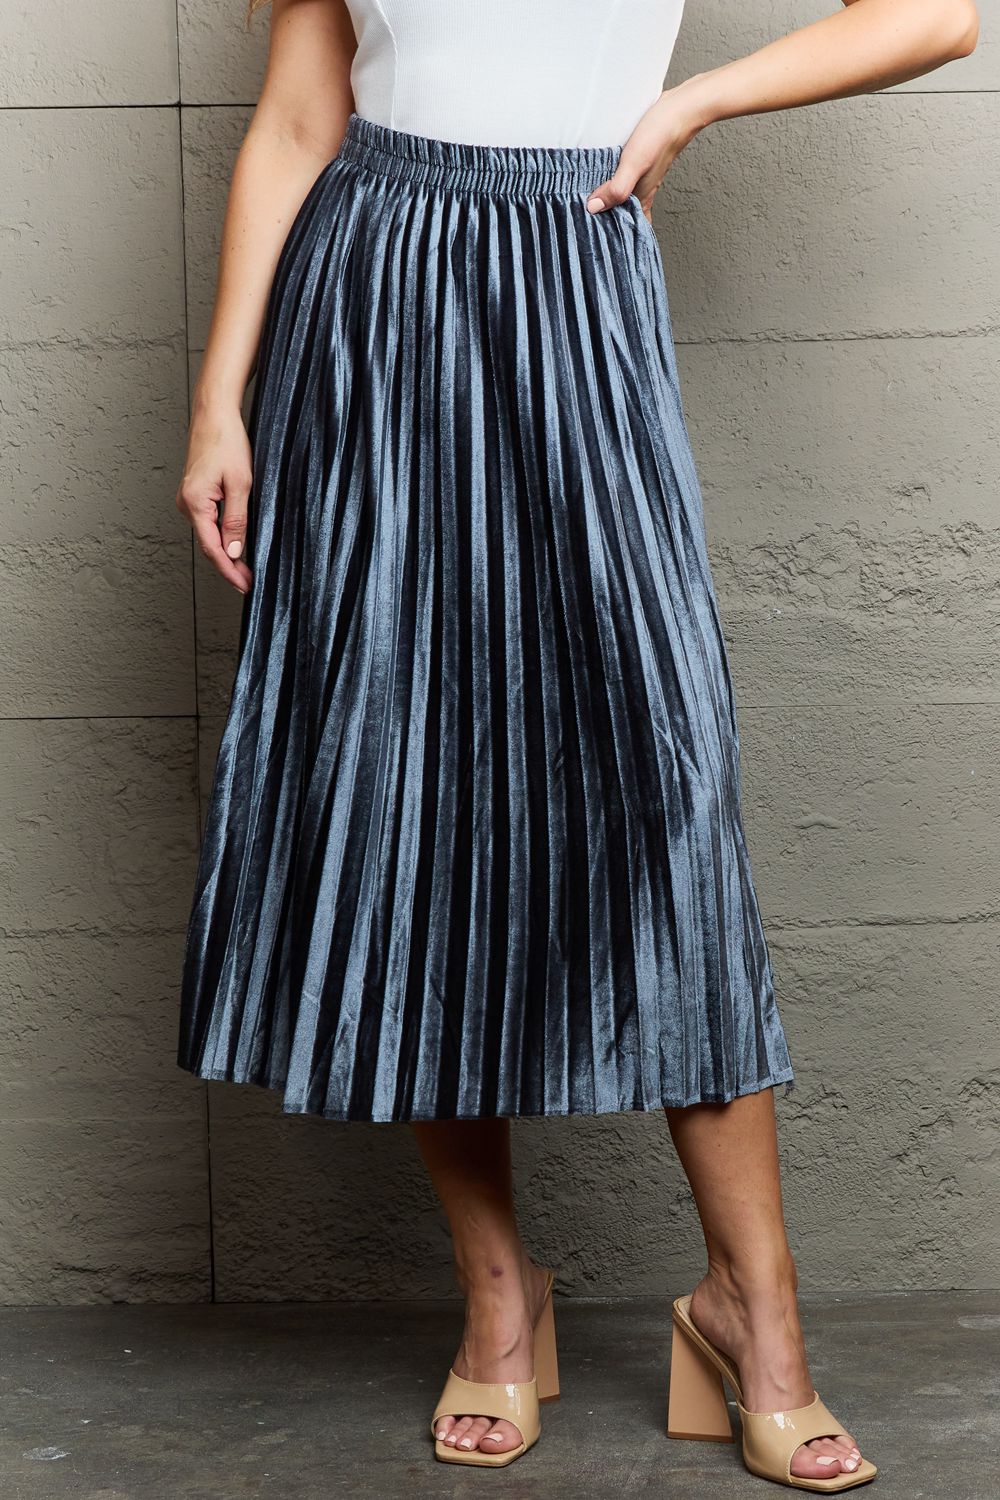 Women's Skirts: Elevate Your Style